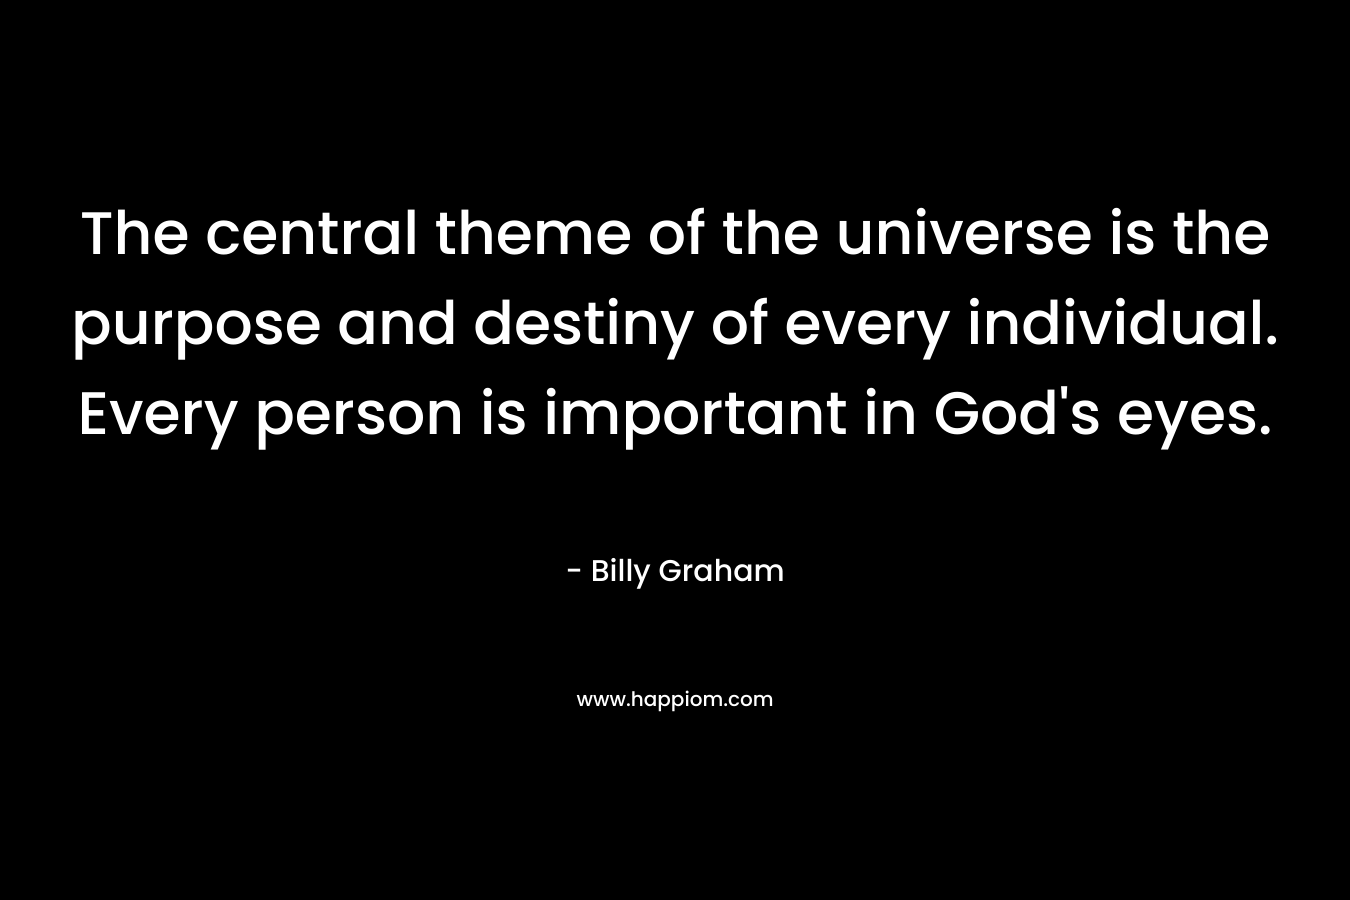 The central theme of the universe is the purpose and destiny of every individual. Every person is important in God's eyes.